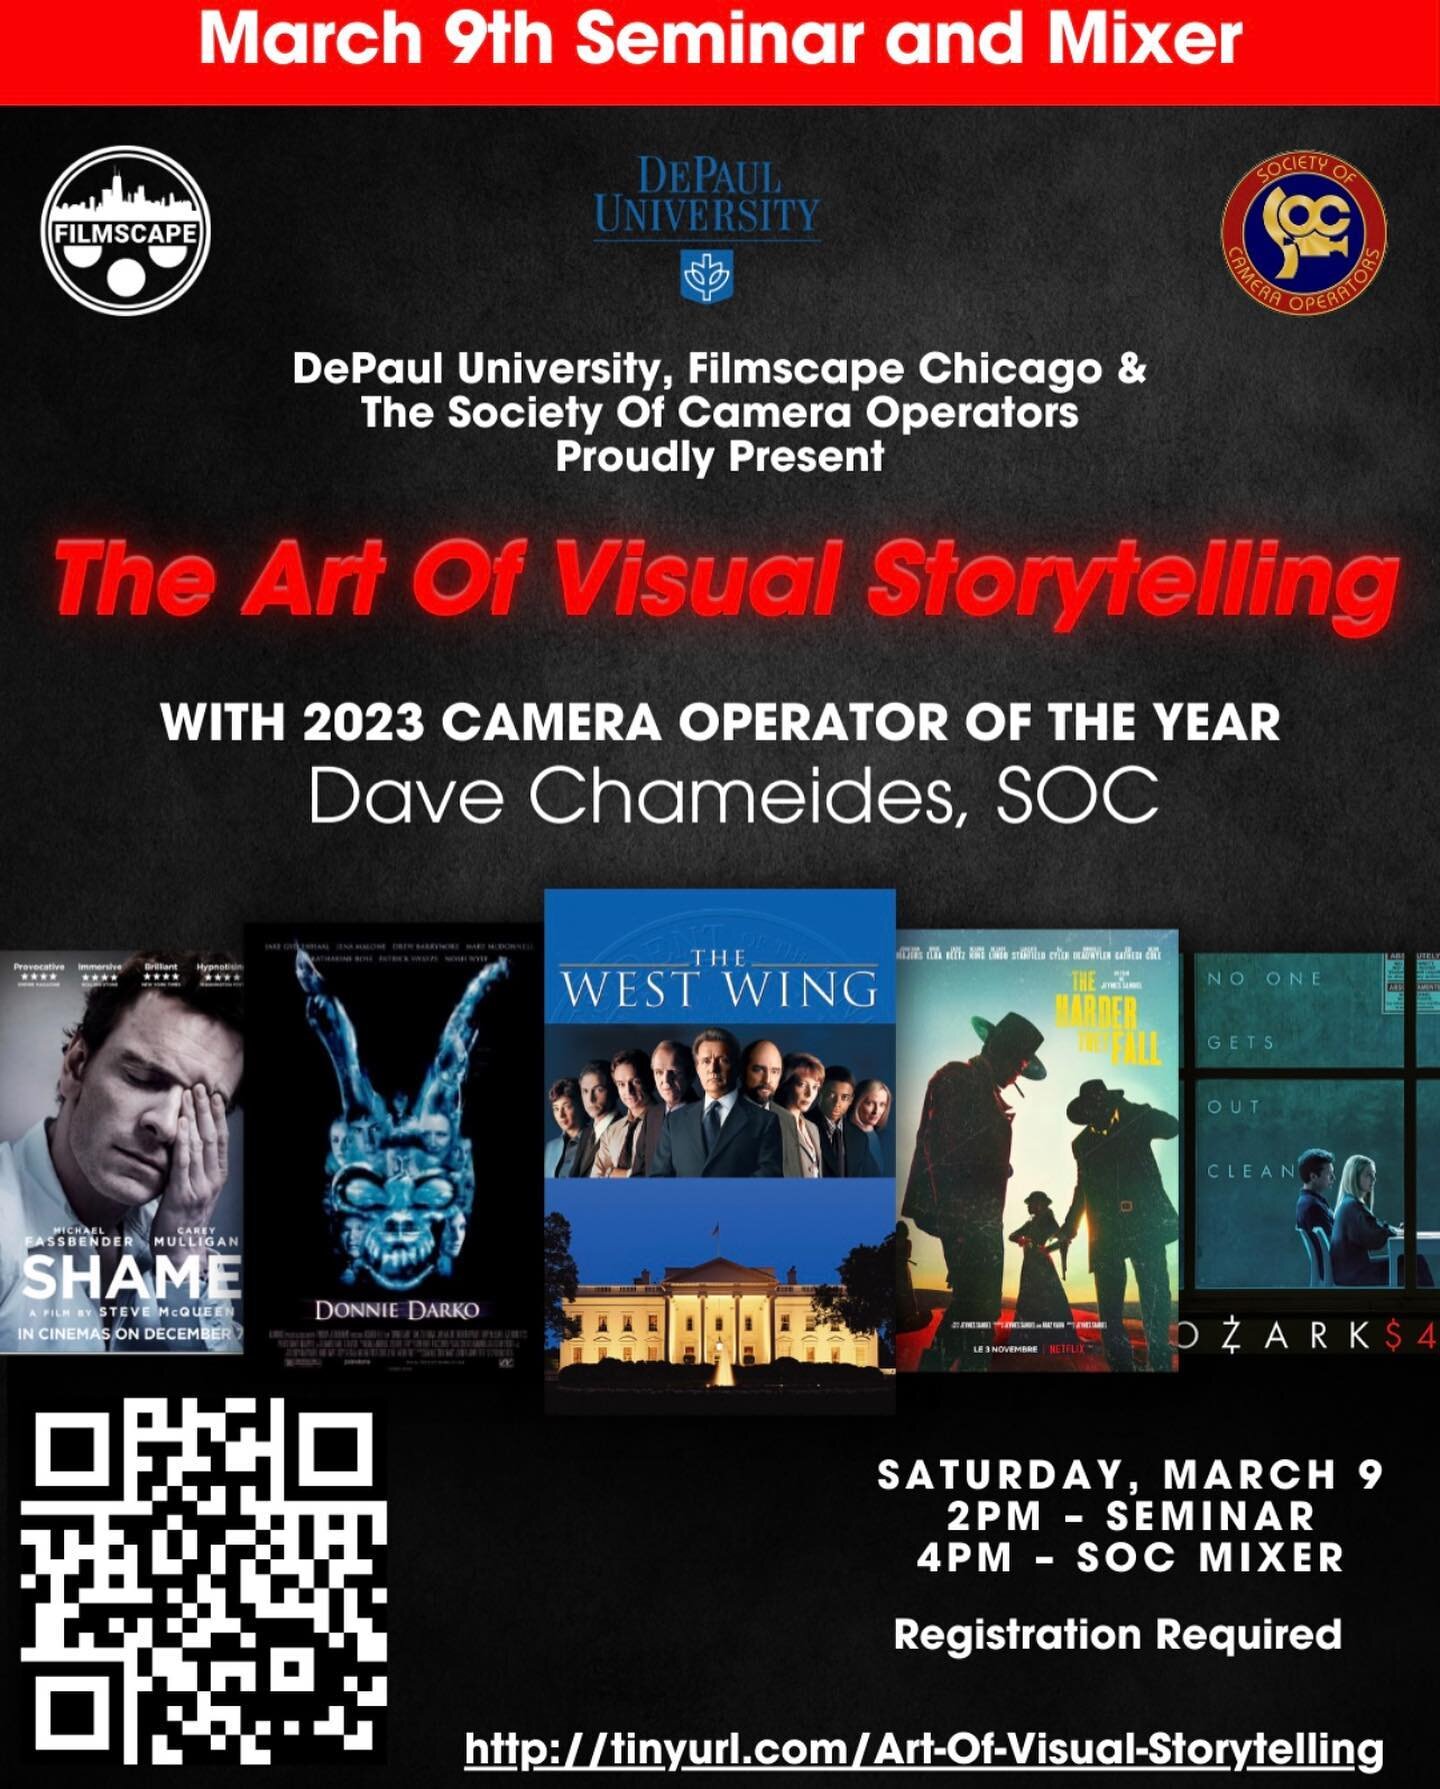 Coming up on March 9&hellip;

&ldquo;The Art of Visual Storytelling&rdquo; presented by Filmscape Chicago, DePaul University, and The Society of Camera Operators. 

Special Guest: Dave Chameides, SOC
2023 Camera Operator of the Year

Don&rsquo;t miss